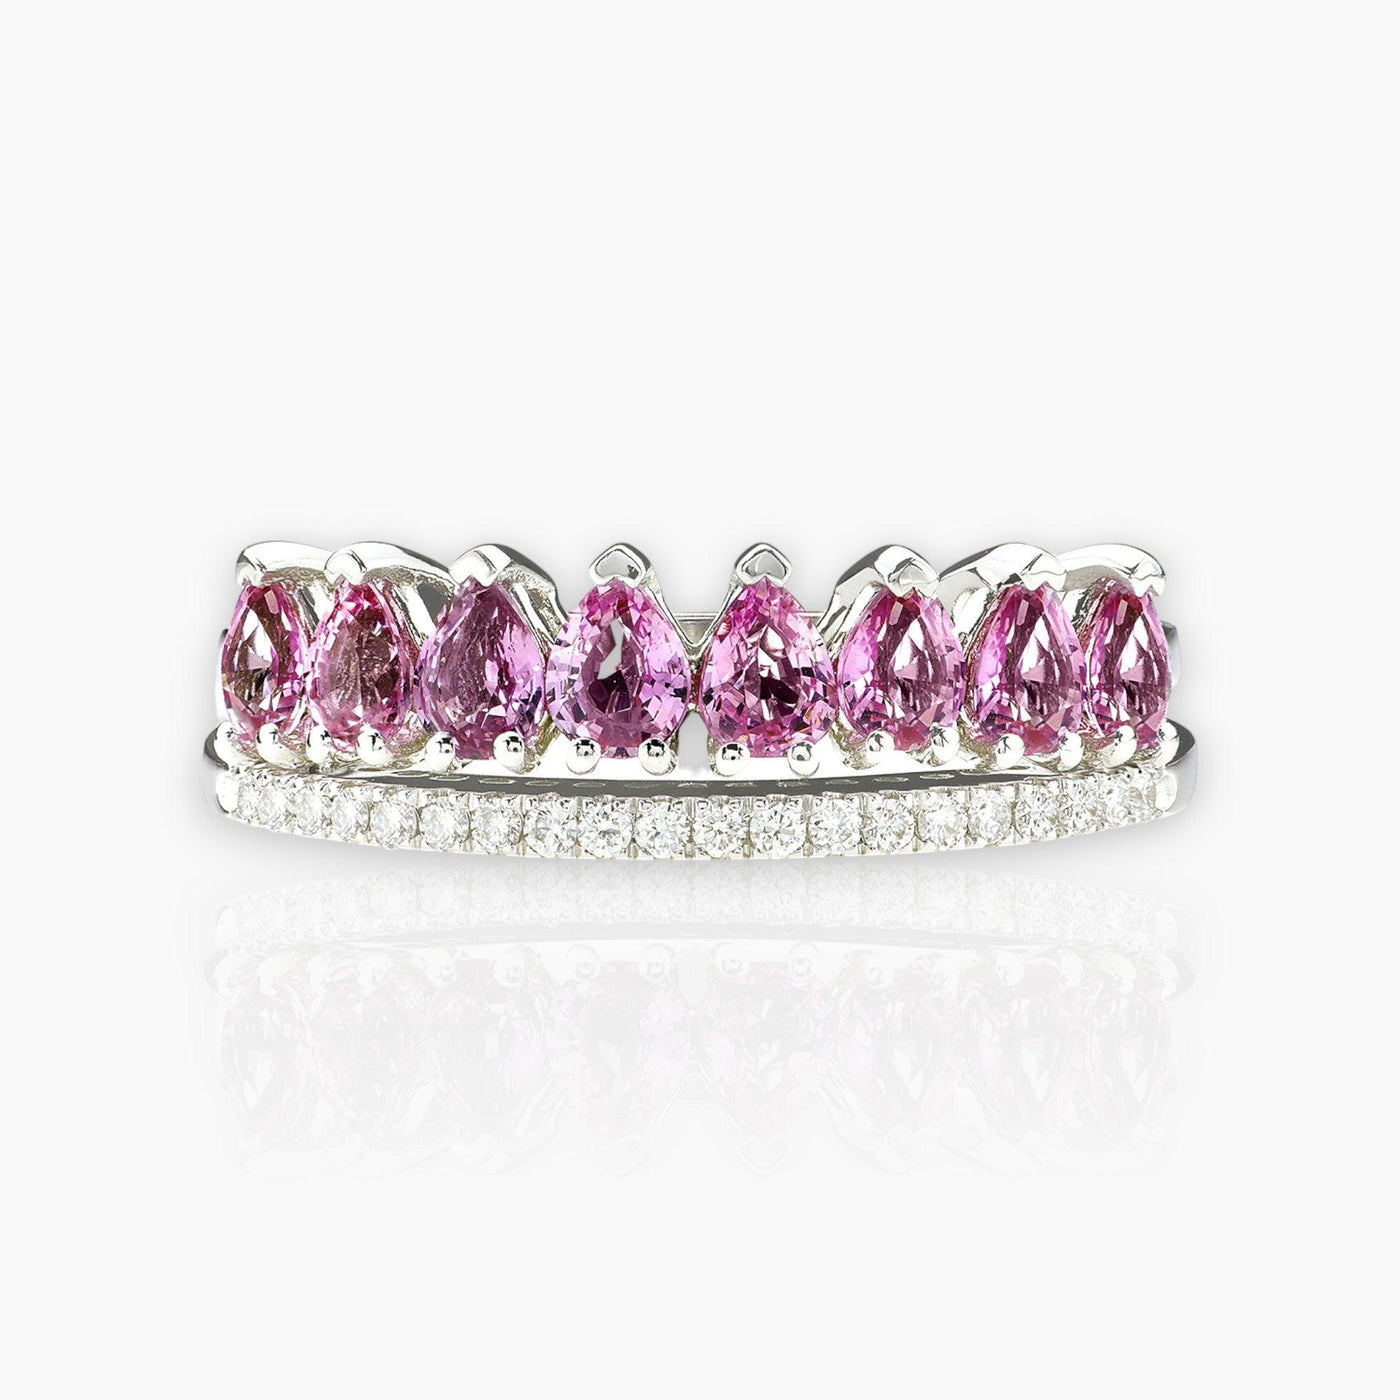 Riviera Ring In White Gold, Pink Sapphires and Diamonds - Moregola Fine Jewelry